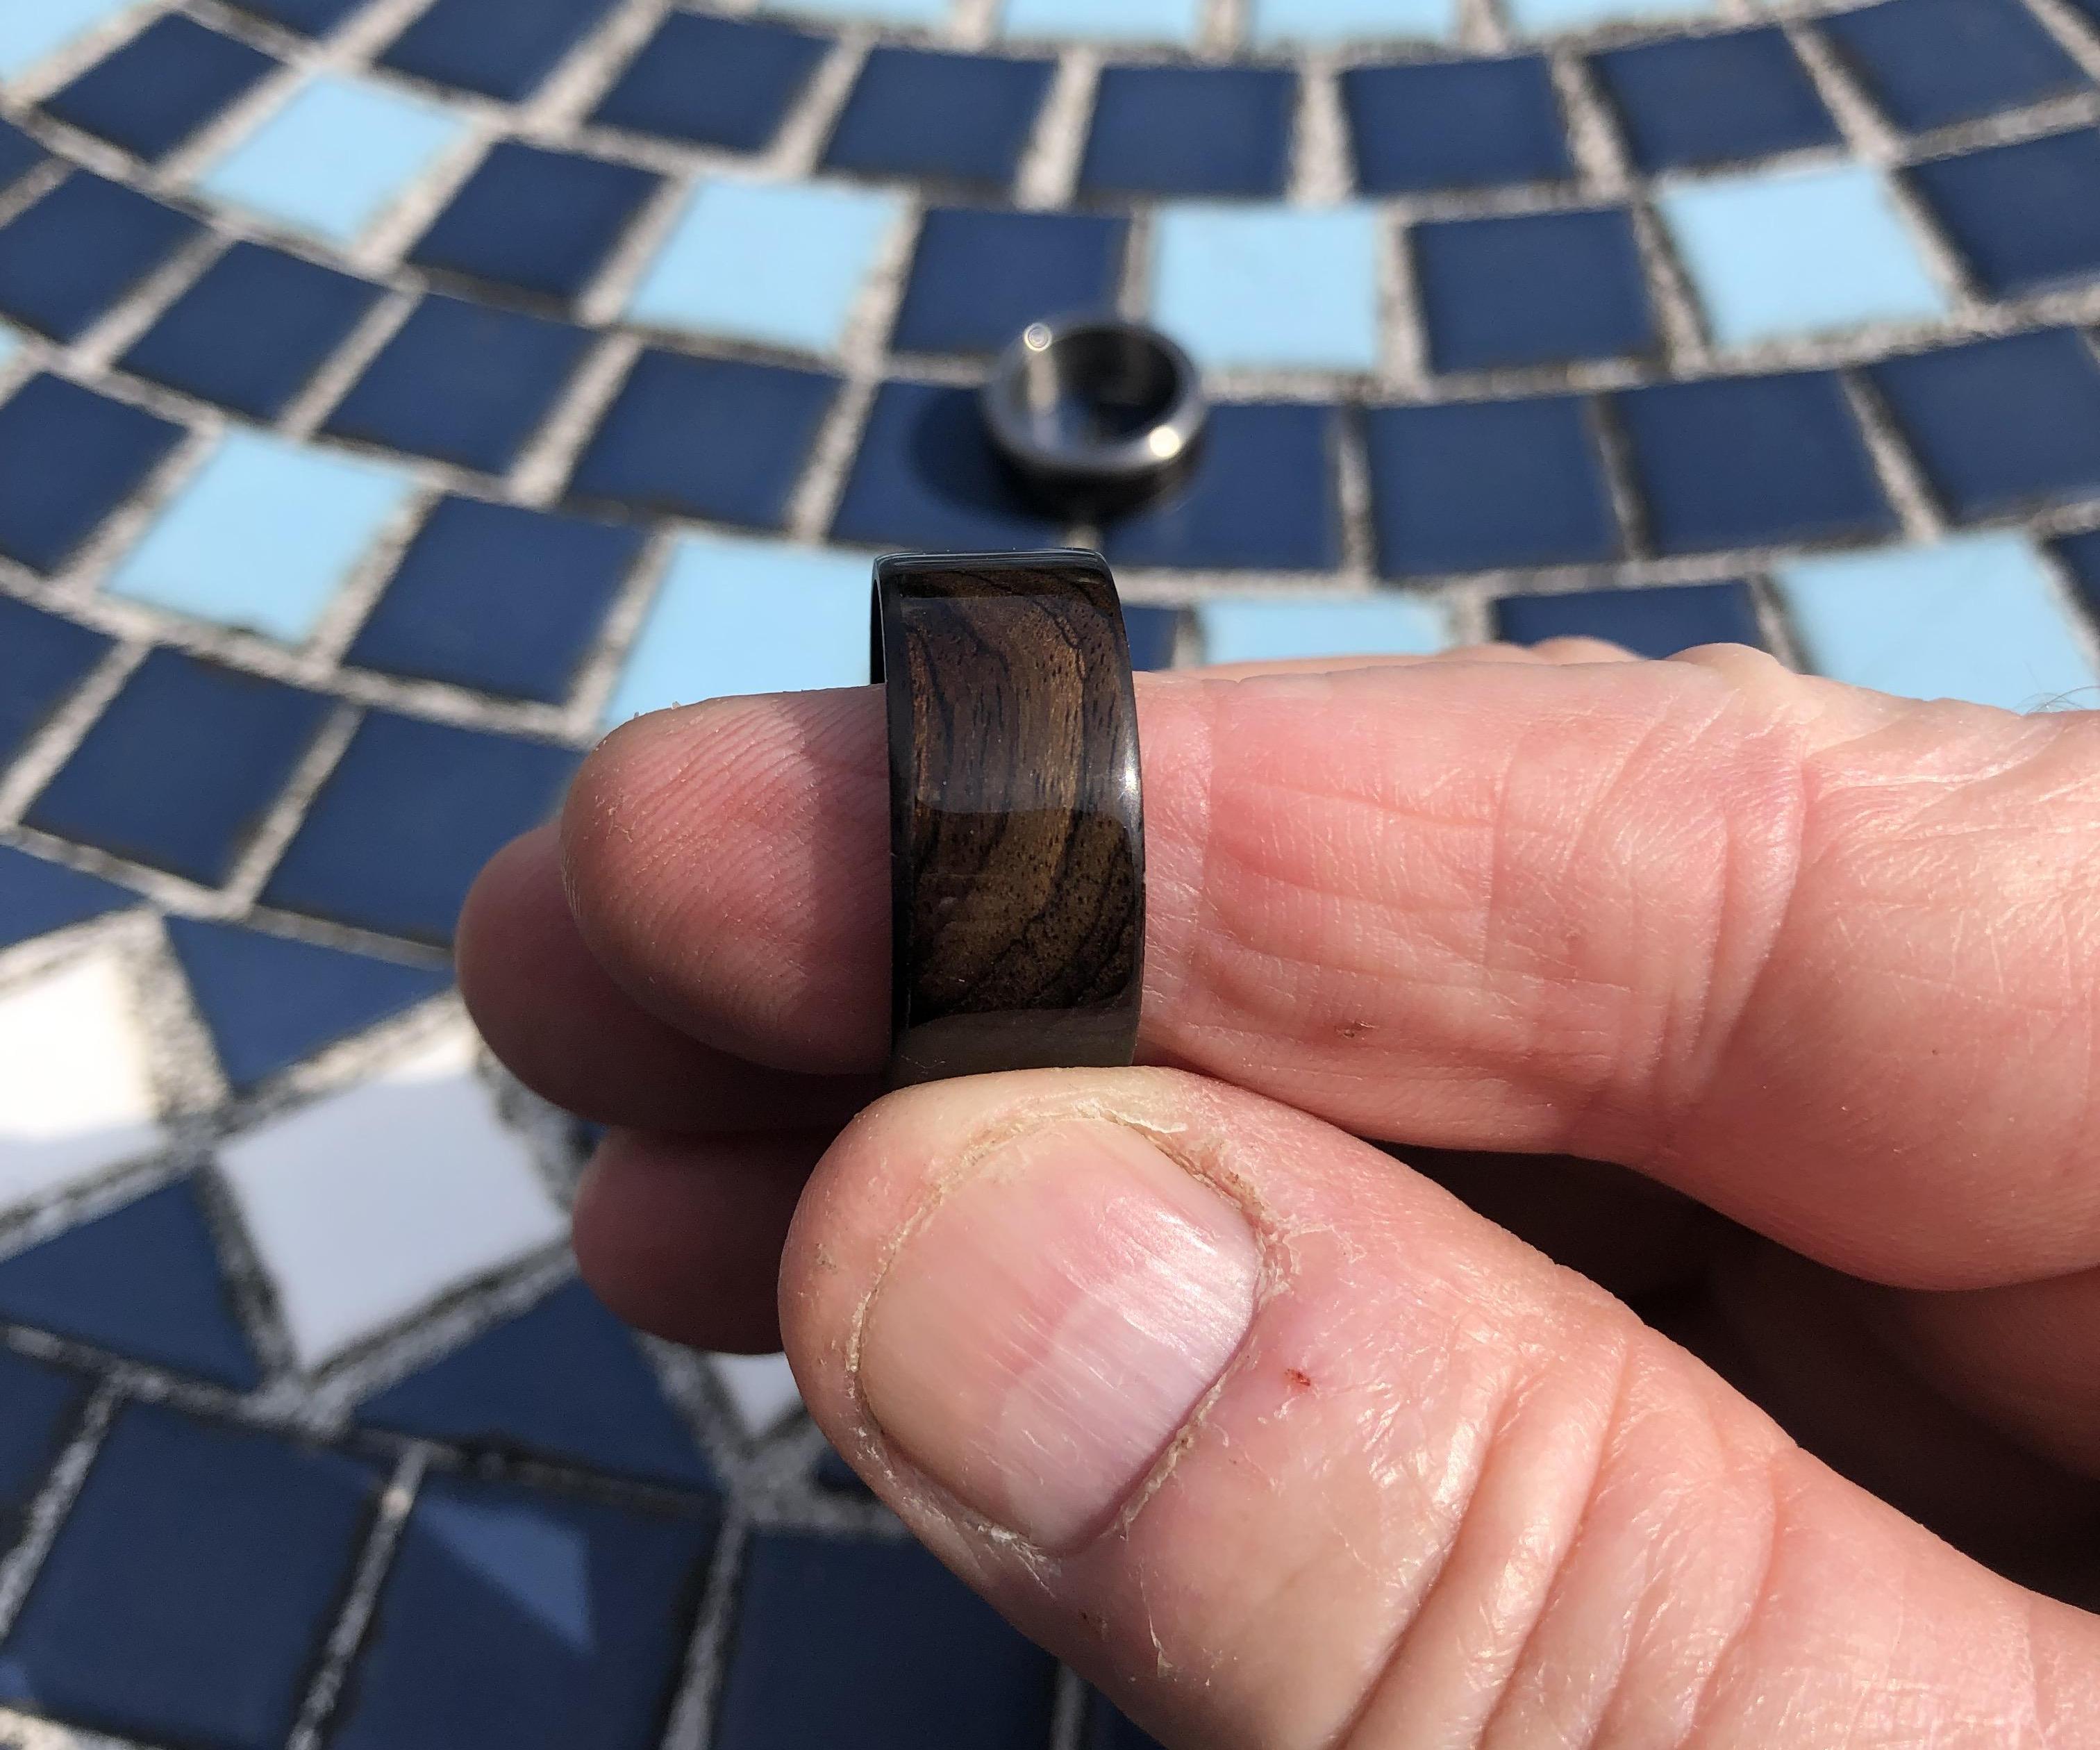 Ebony Ring With a Titanium Recessed 2 Piece Band Diy...Updated With Plain Ebony Band